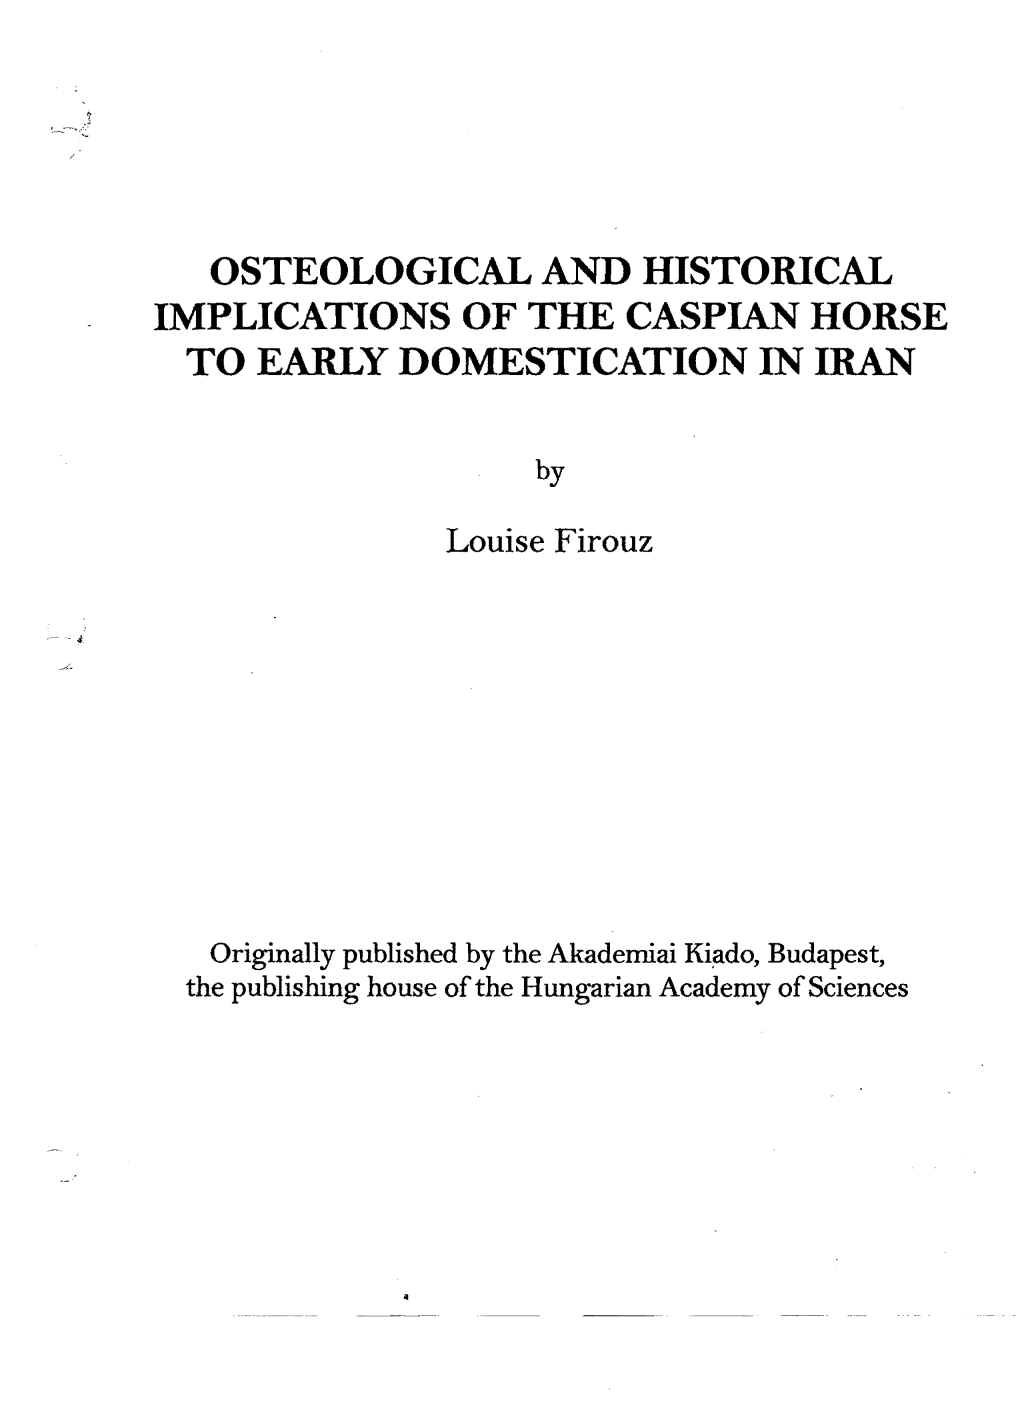 Osteological & Historical Implications of the Caspian Horse to Early